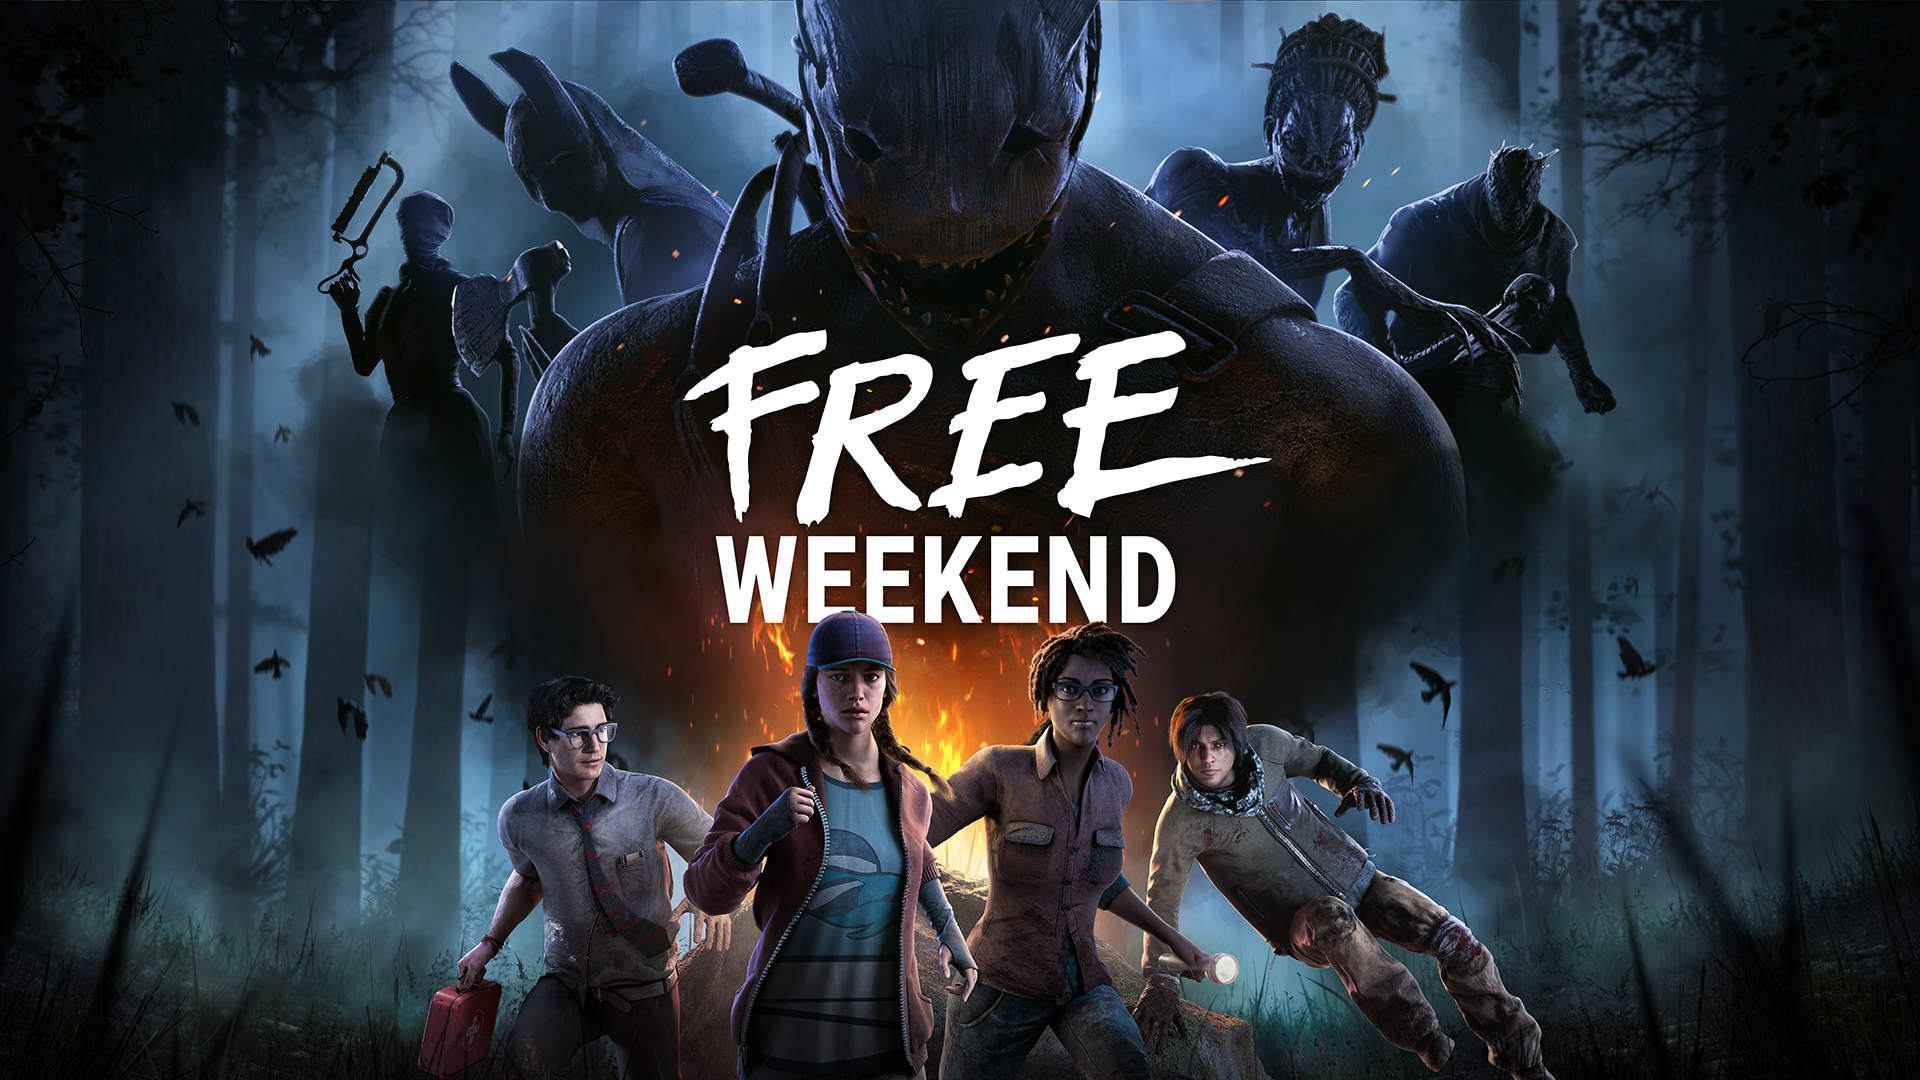 Premium Rift Pass for FREE with Twitch Prime! : r/deadbydaylight